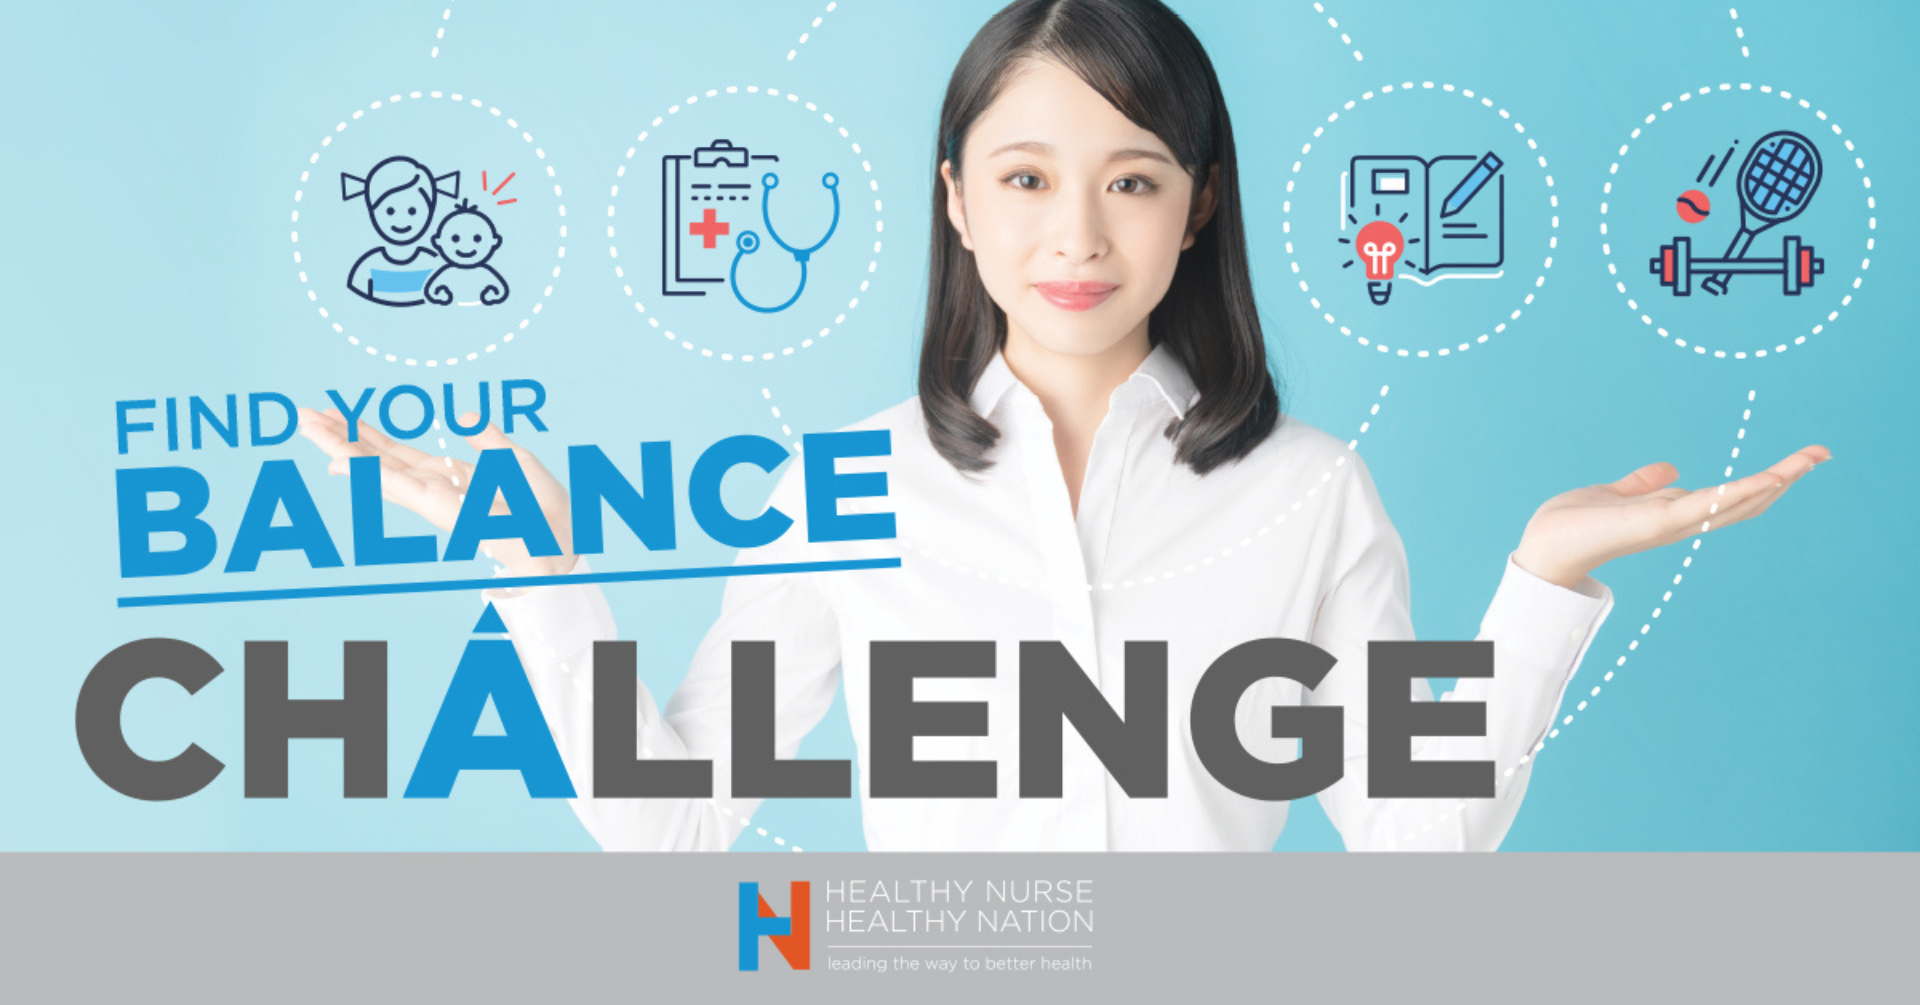 Do Something Social - Healthy Nurse, Healthy Nation - Find Your Balance challenge - Day 9 4654